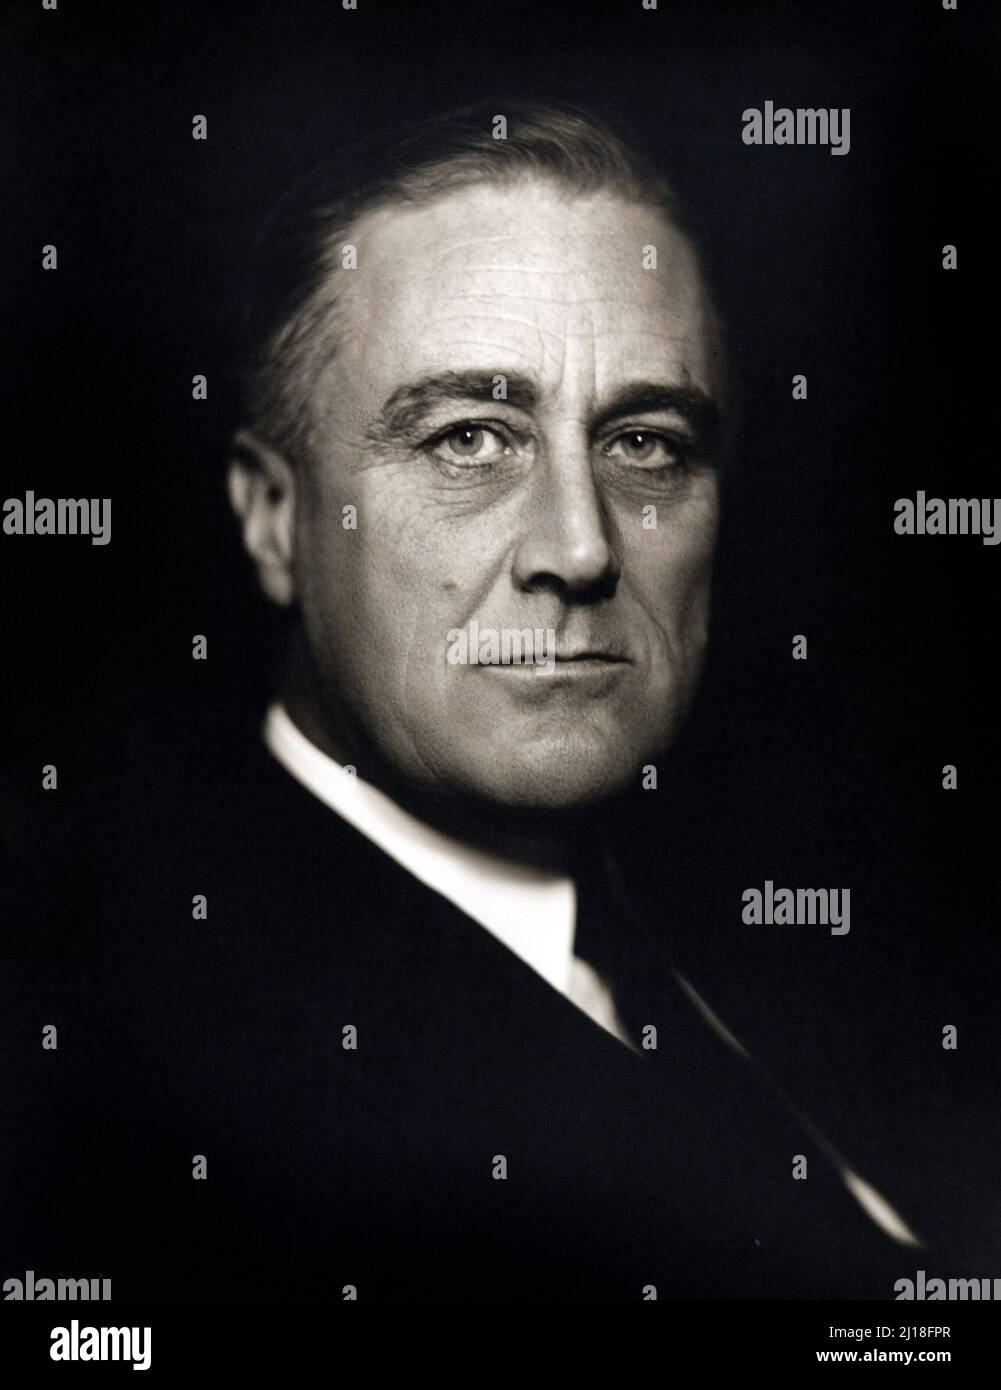 Portrait of Franklin D Roosevelt (1882-1945), the 32nd President of the USA, by Vincenzo Laviosa, c. 1932 Stock Photo